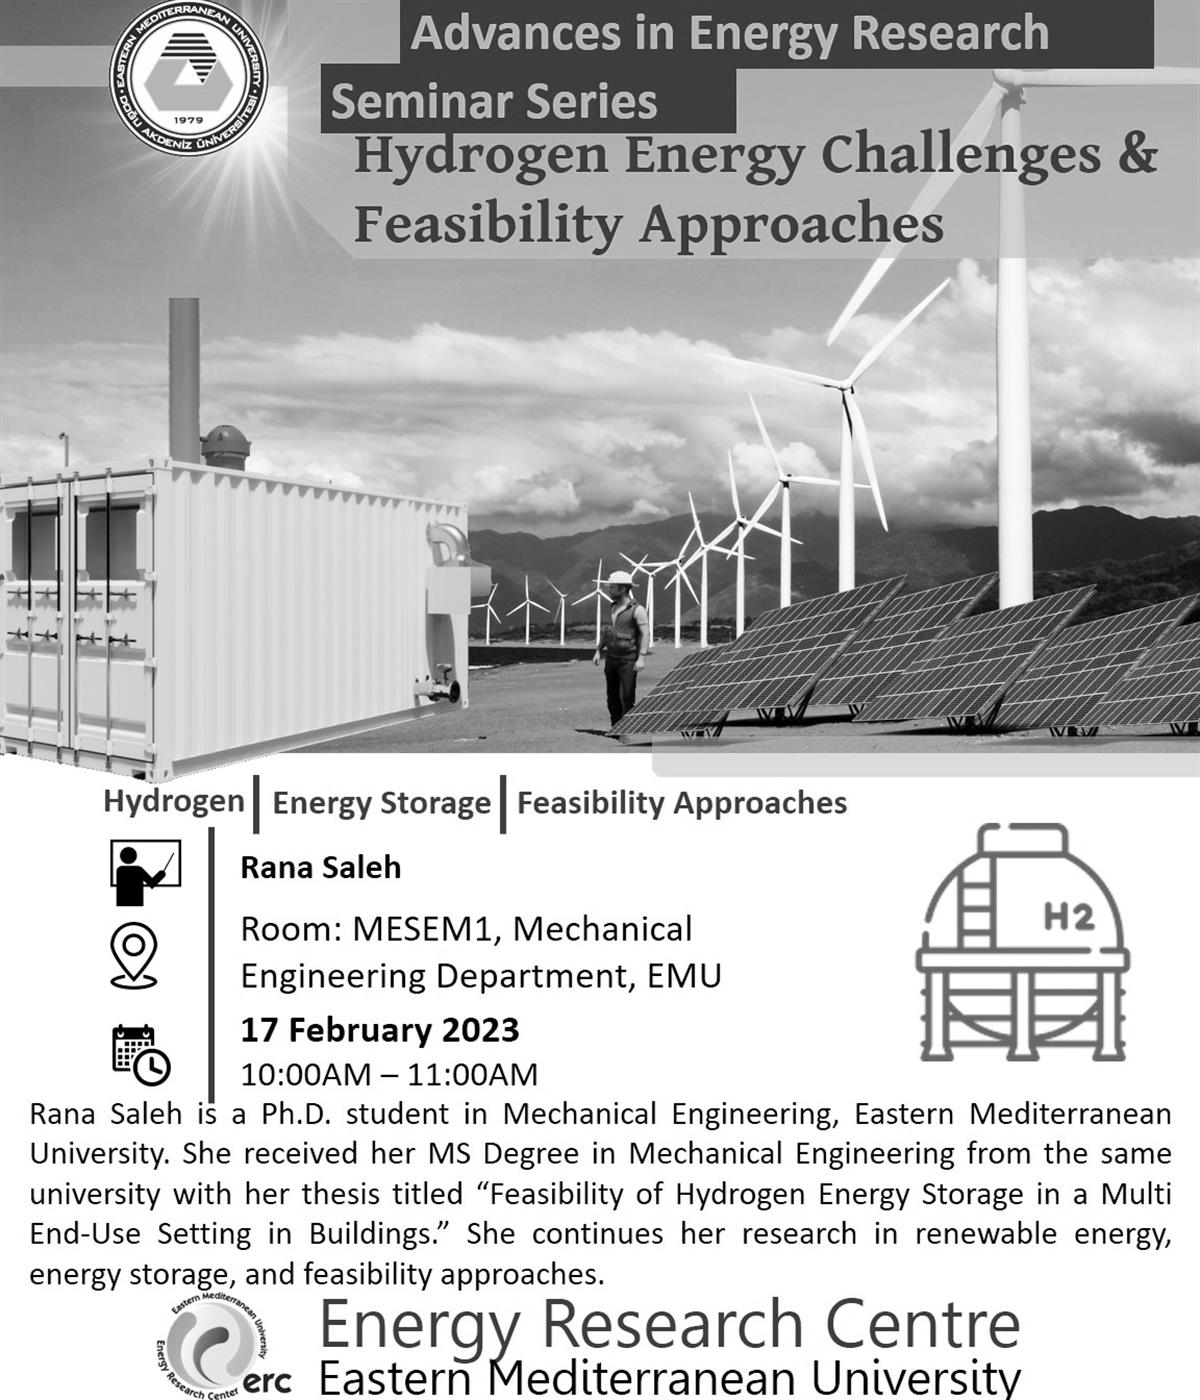 POSTPONED Advances in Energy Research Seminar Series "Hydrogen Energy Challenges & Feasibility Approches"